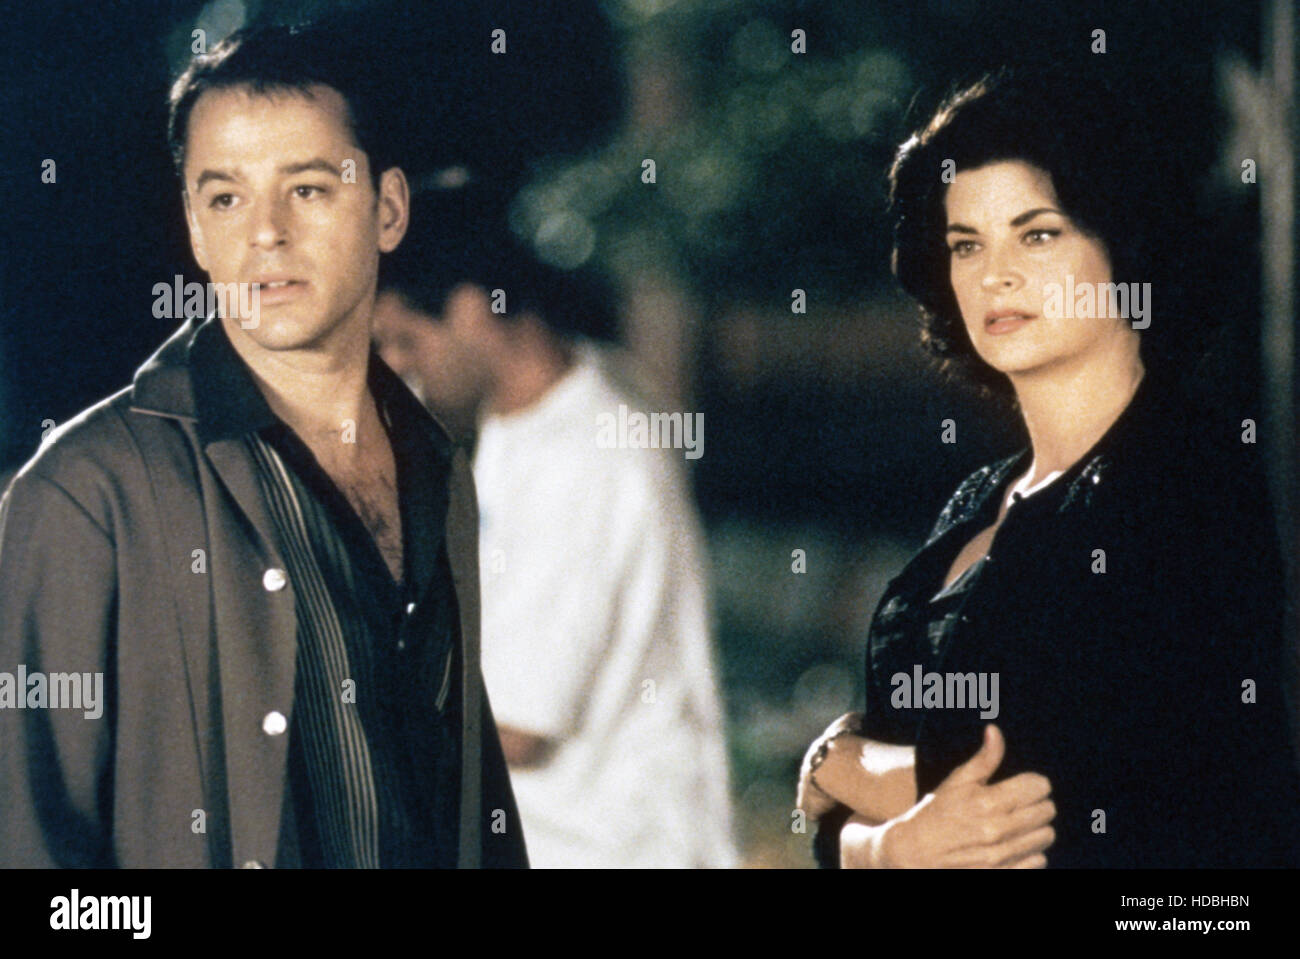 RADIANT CITY, (from left): Gil Bellows, Kirstie Alley, 1996. © Warner ...